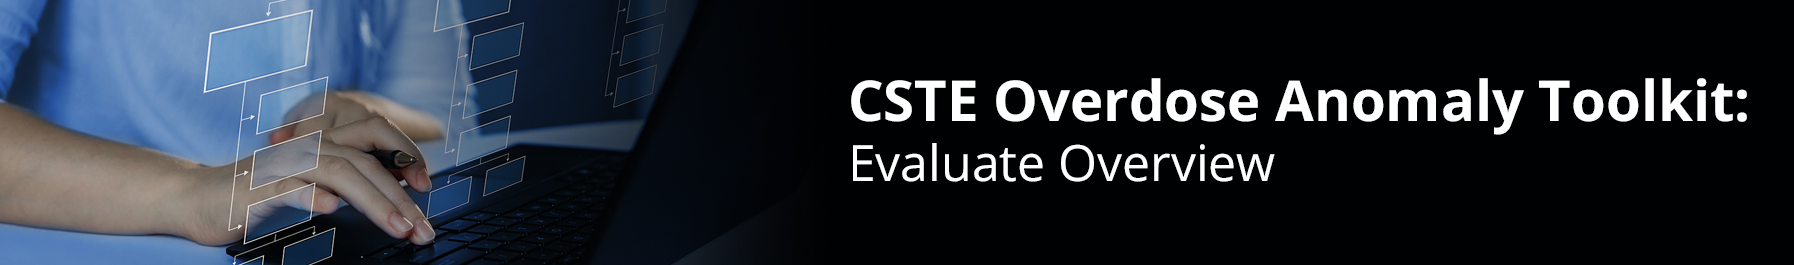 CSTE Overdose Anomaly Toolkit: Evaluate Overview